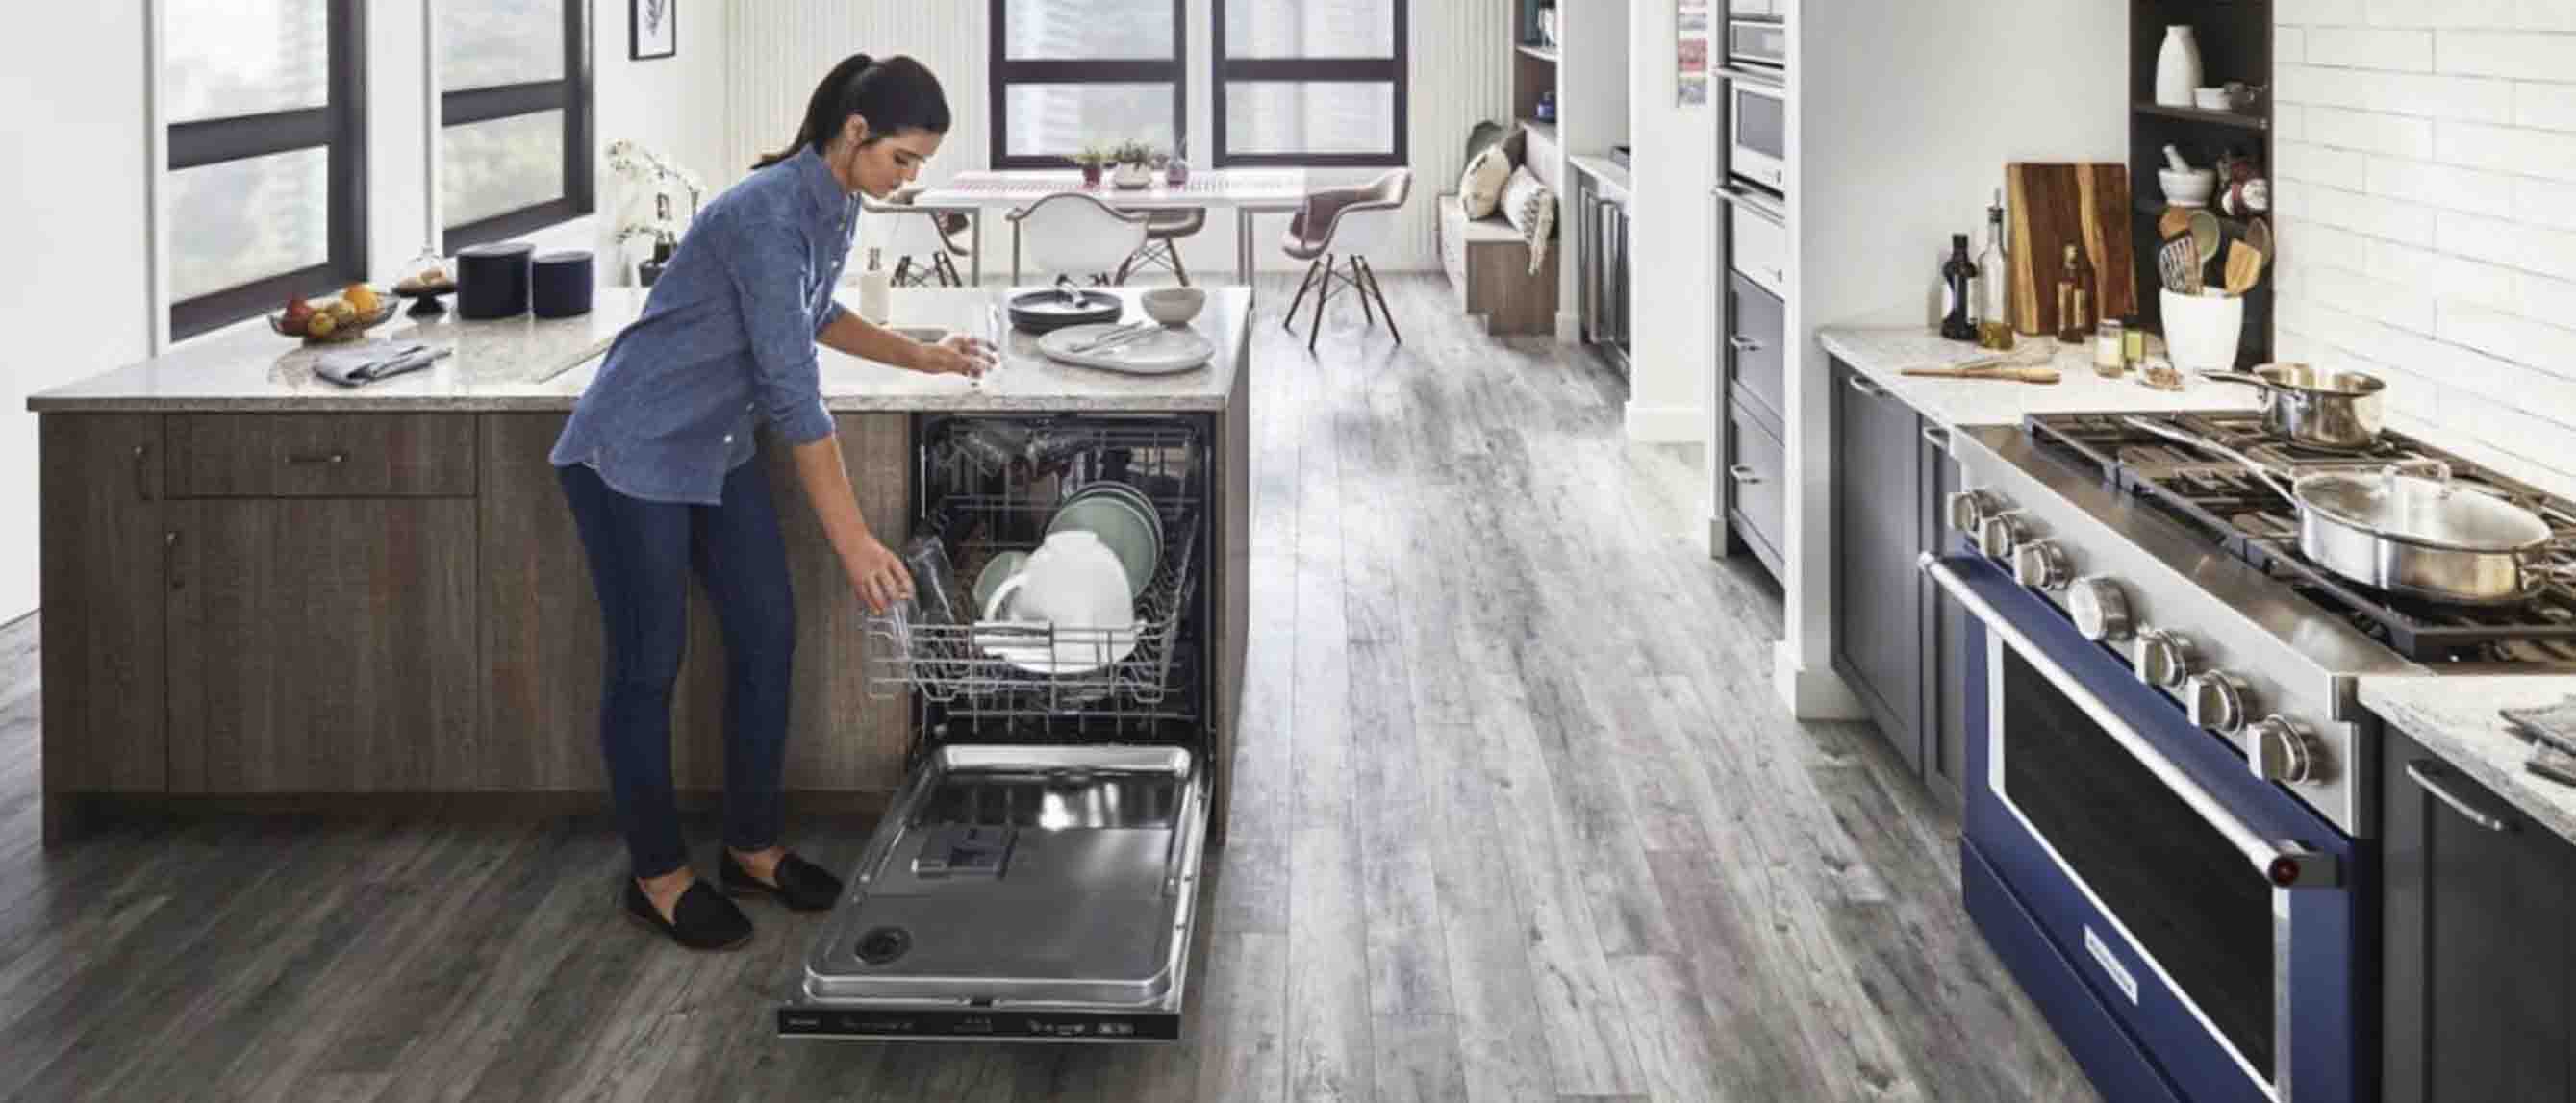 Woman loading dishwasher in home kitchen